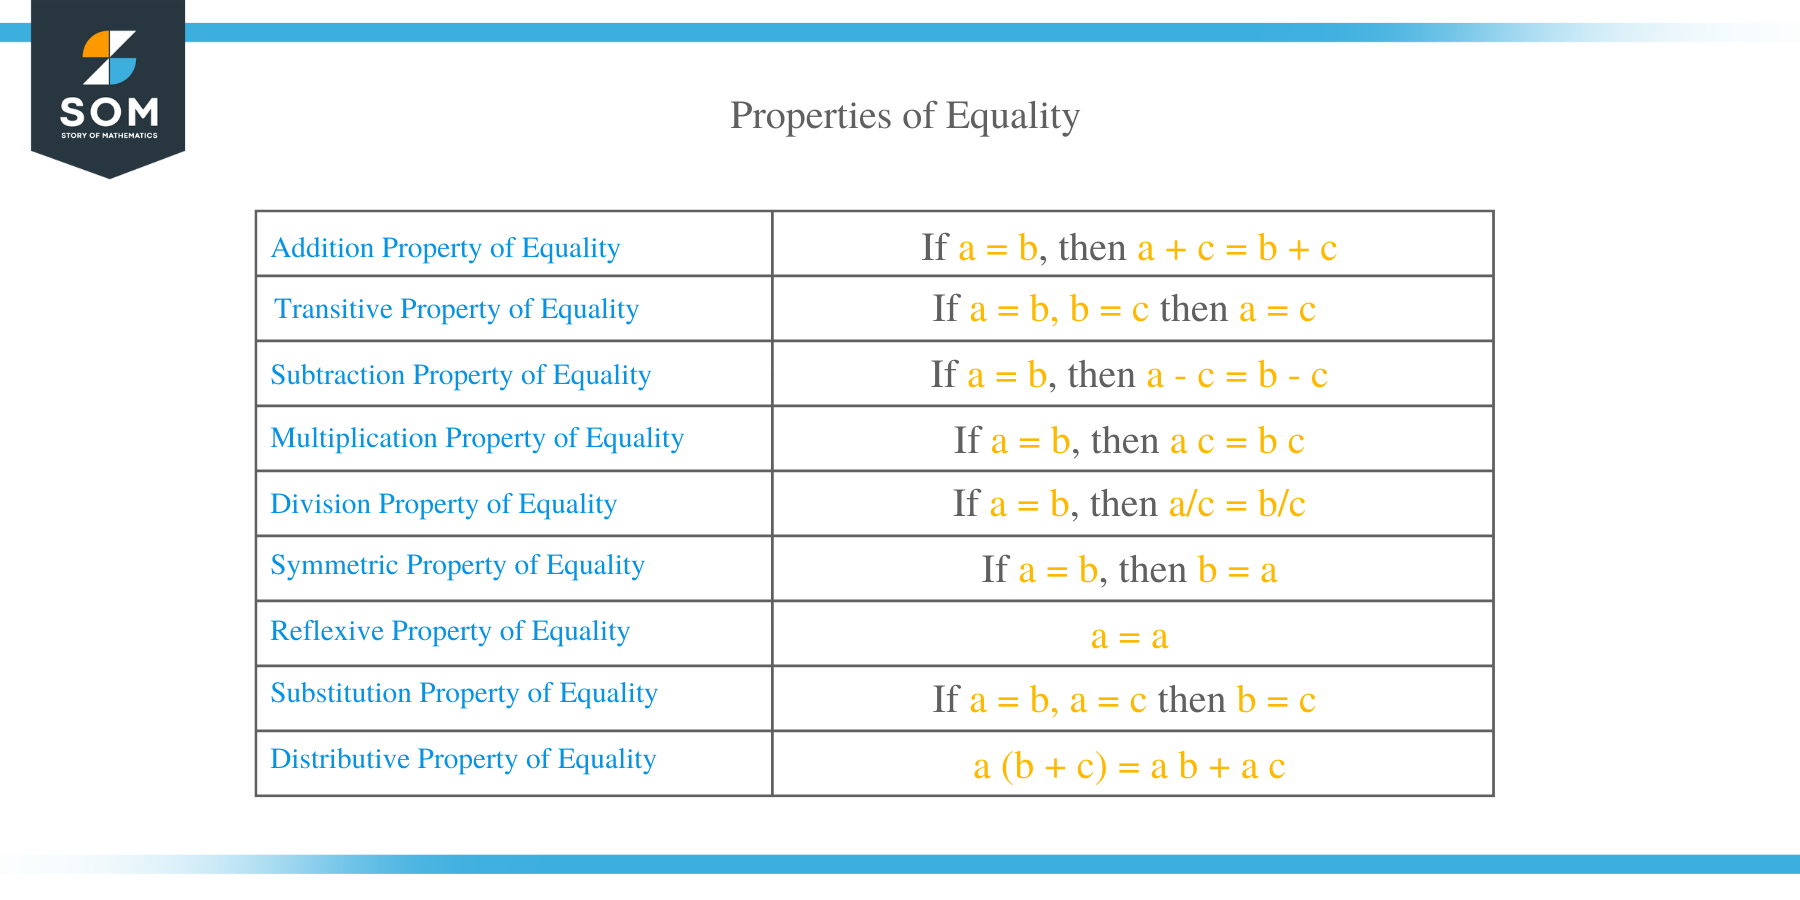 What Are Properties of Equality?